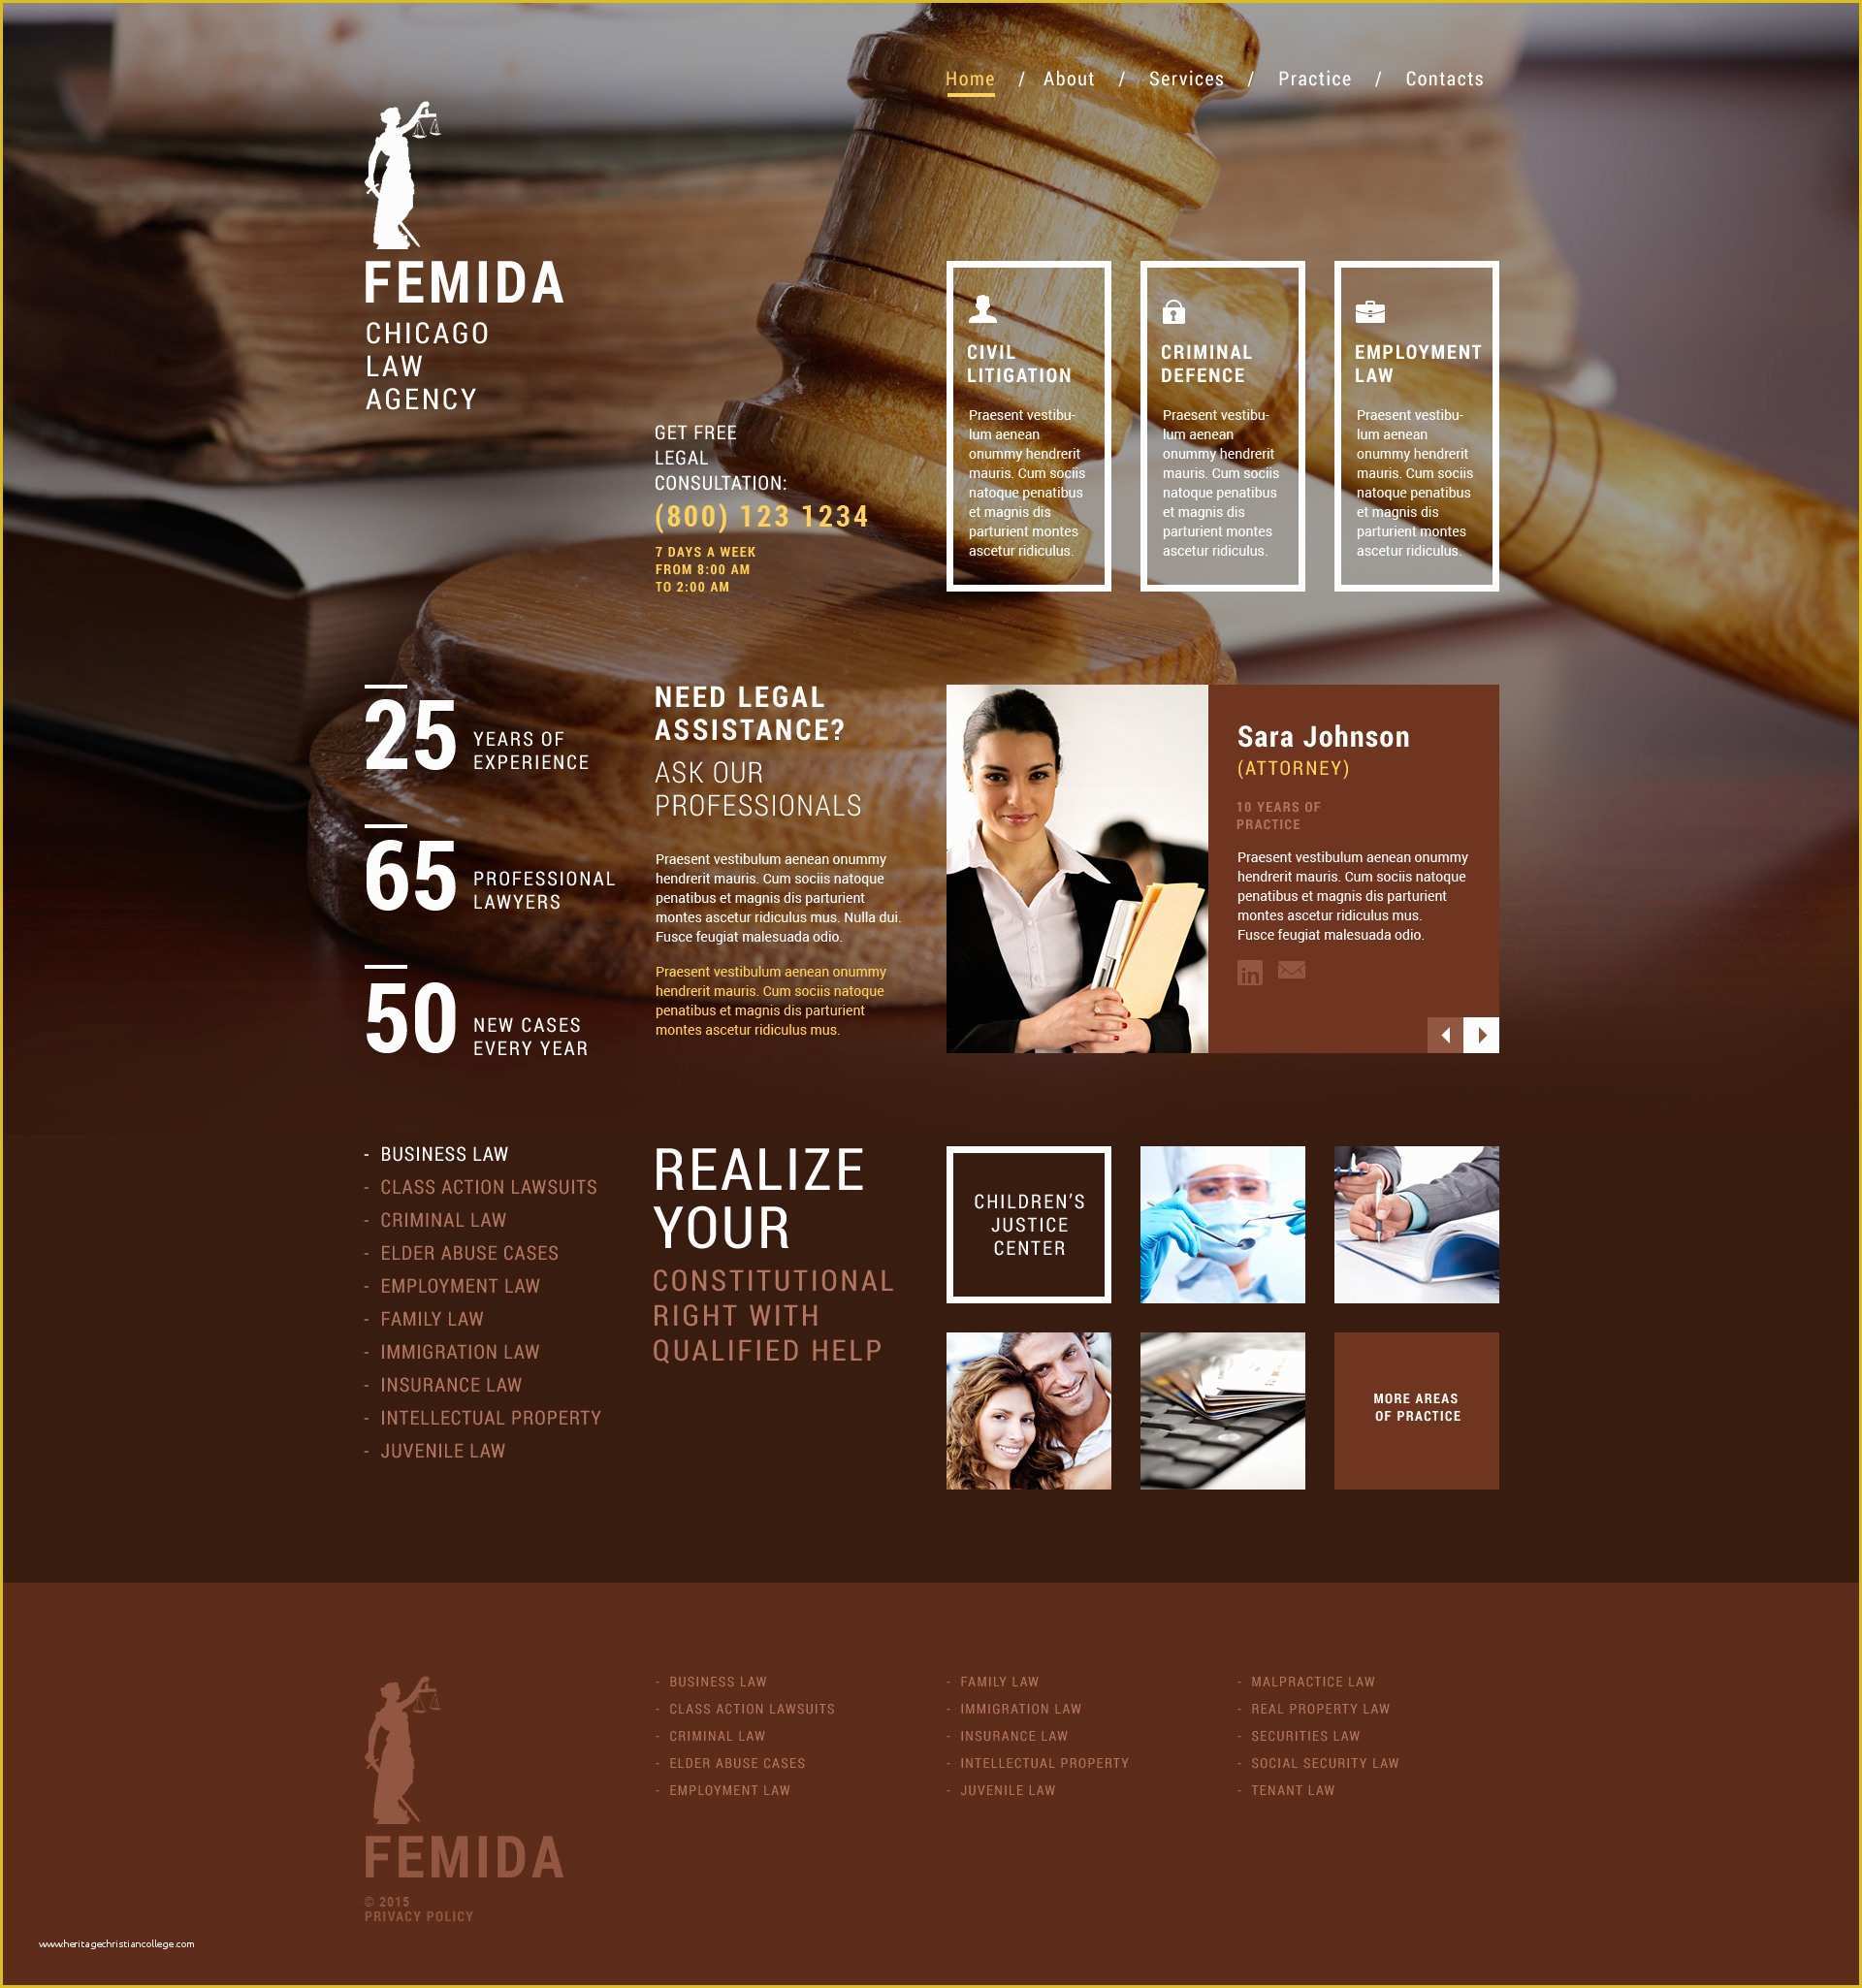 Law Firm Website Design Templates Free Download Of Law Firm Website Templates Free Sample Lawyer Download